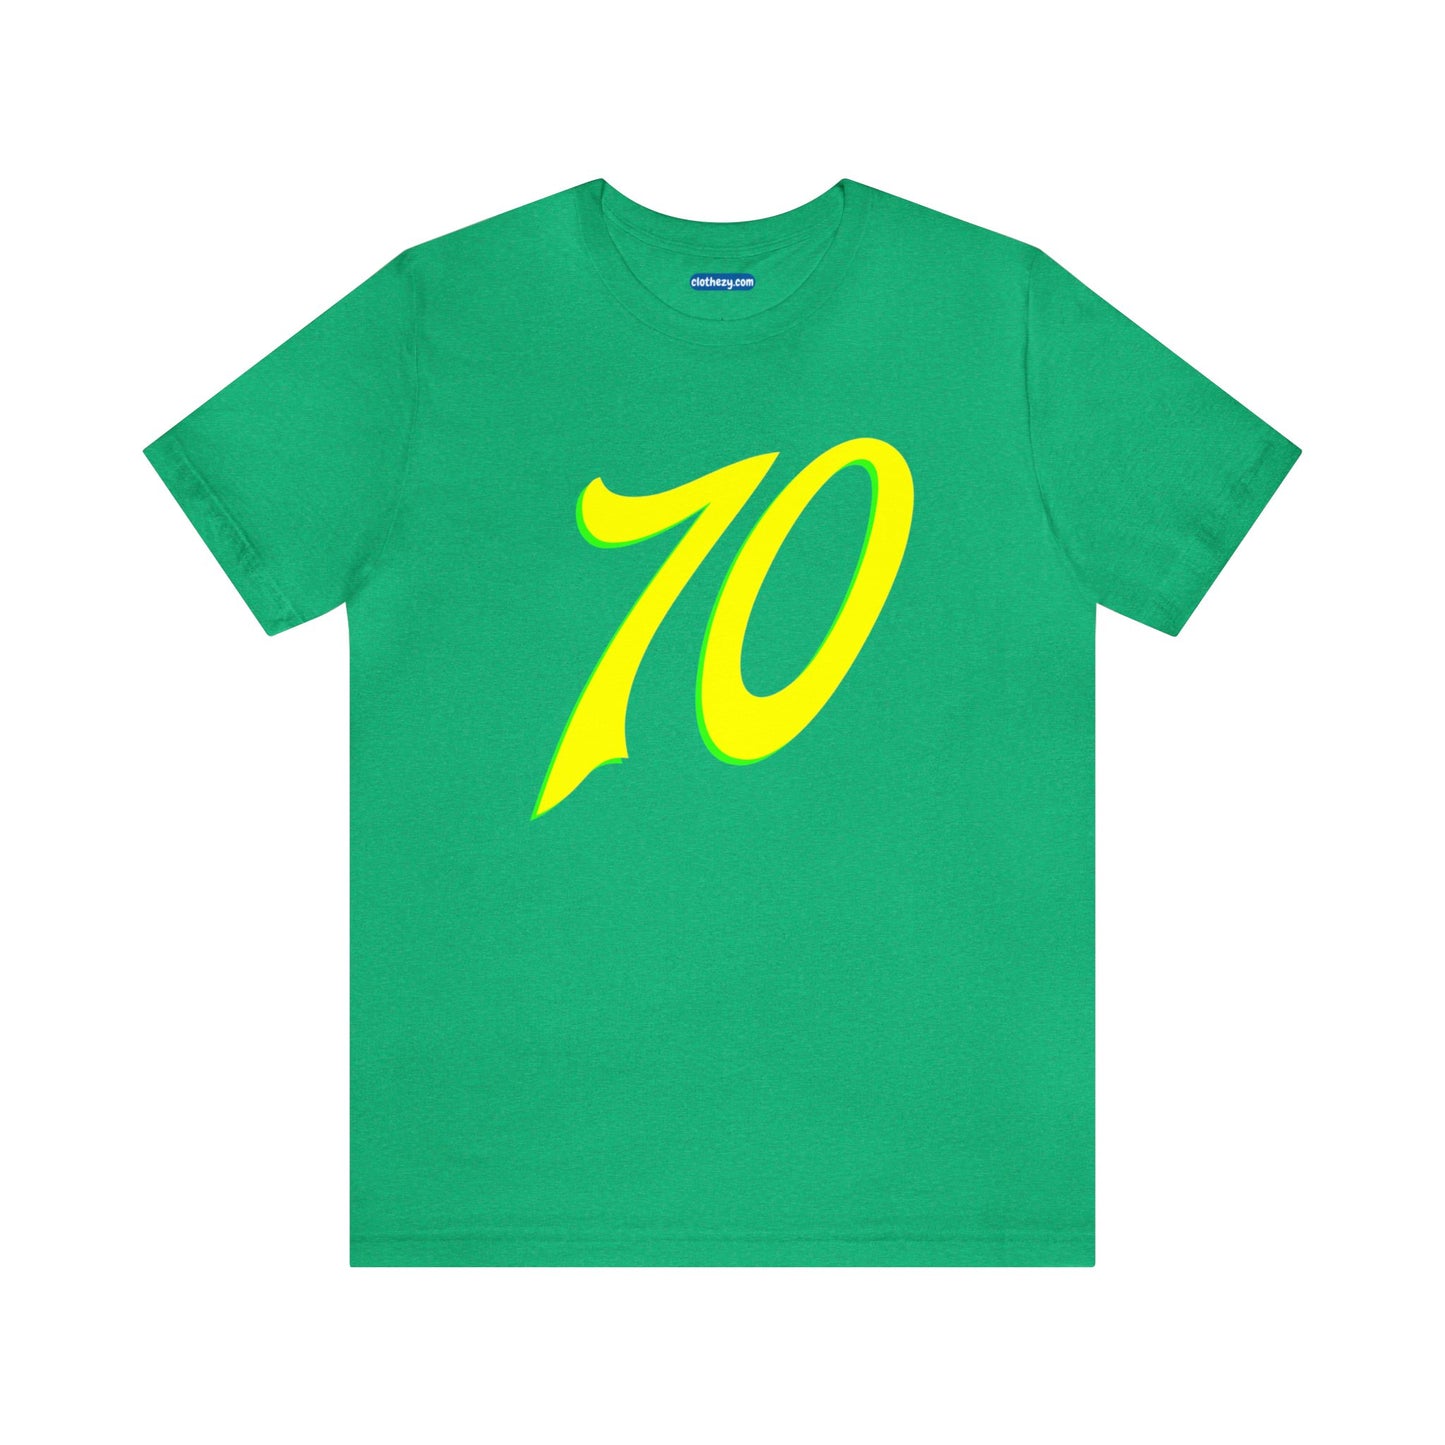 Number 70 Design - Soft Cotton Tee for birthdays and celebrations, Gift for friends and family, Multiple Options by clothezy.com in Royal Blue Heather Size Small - Buy Now